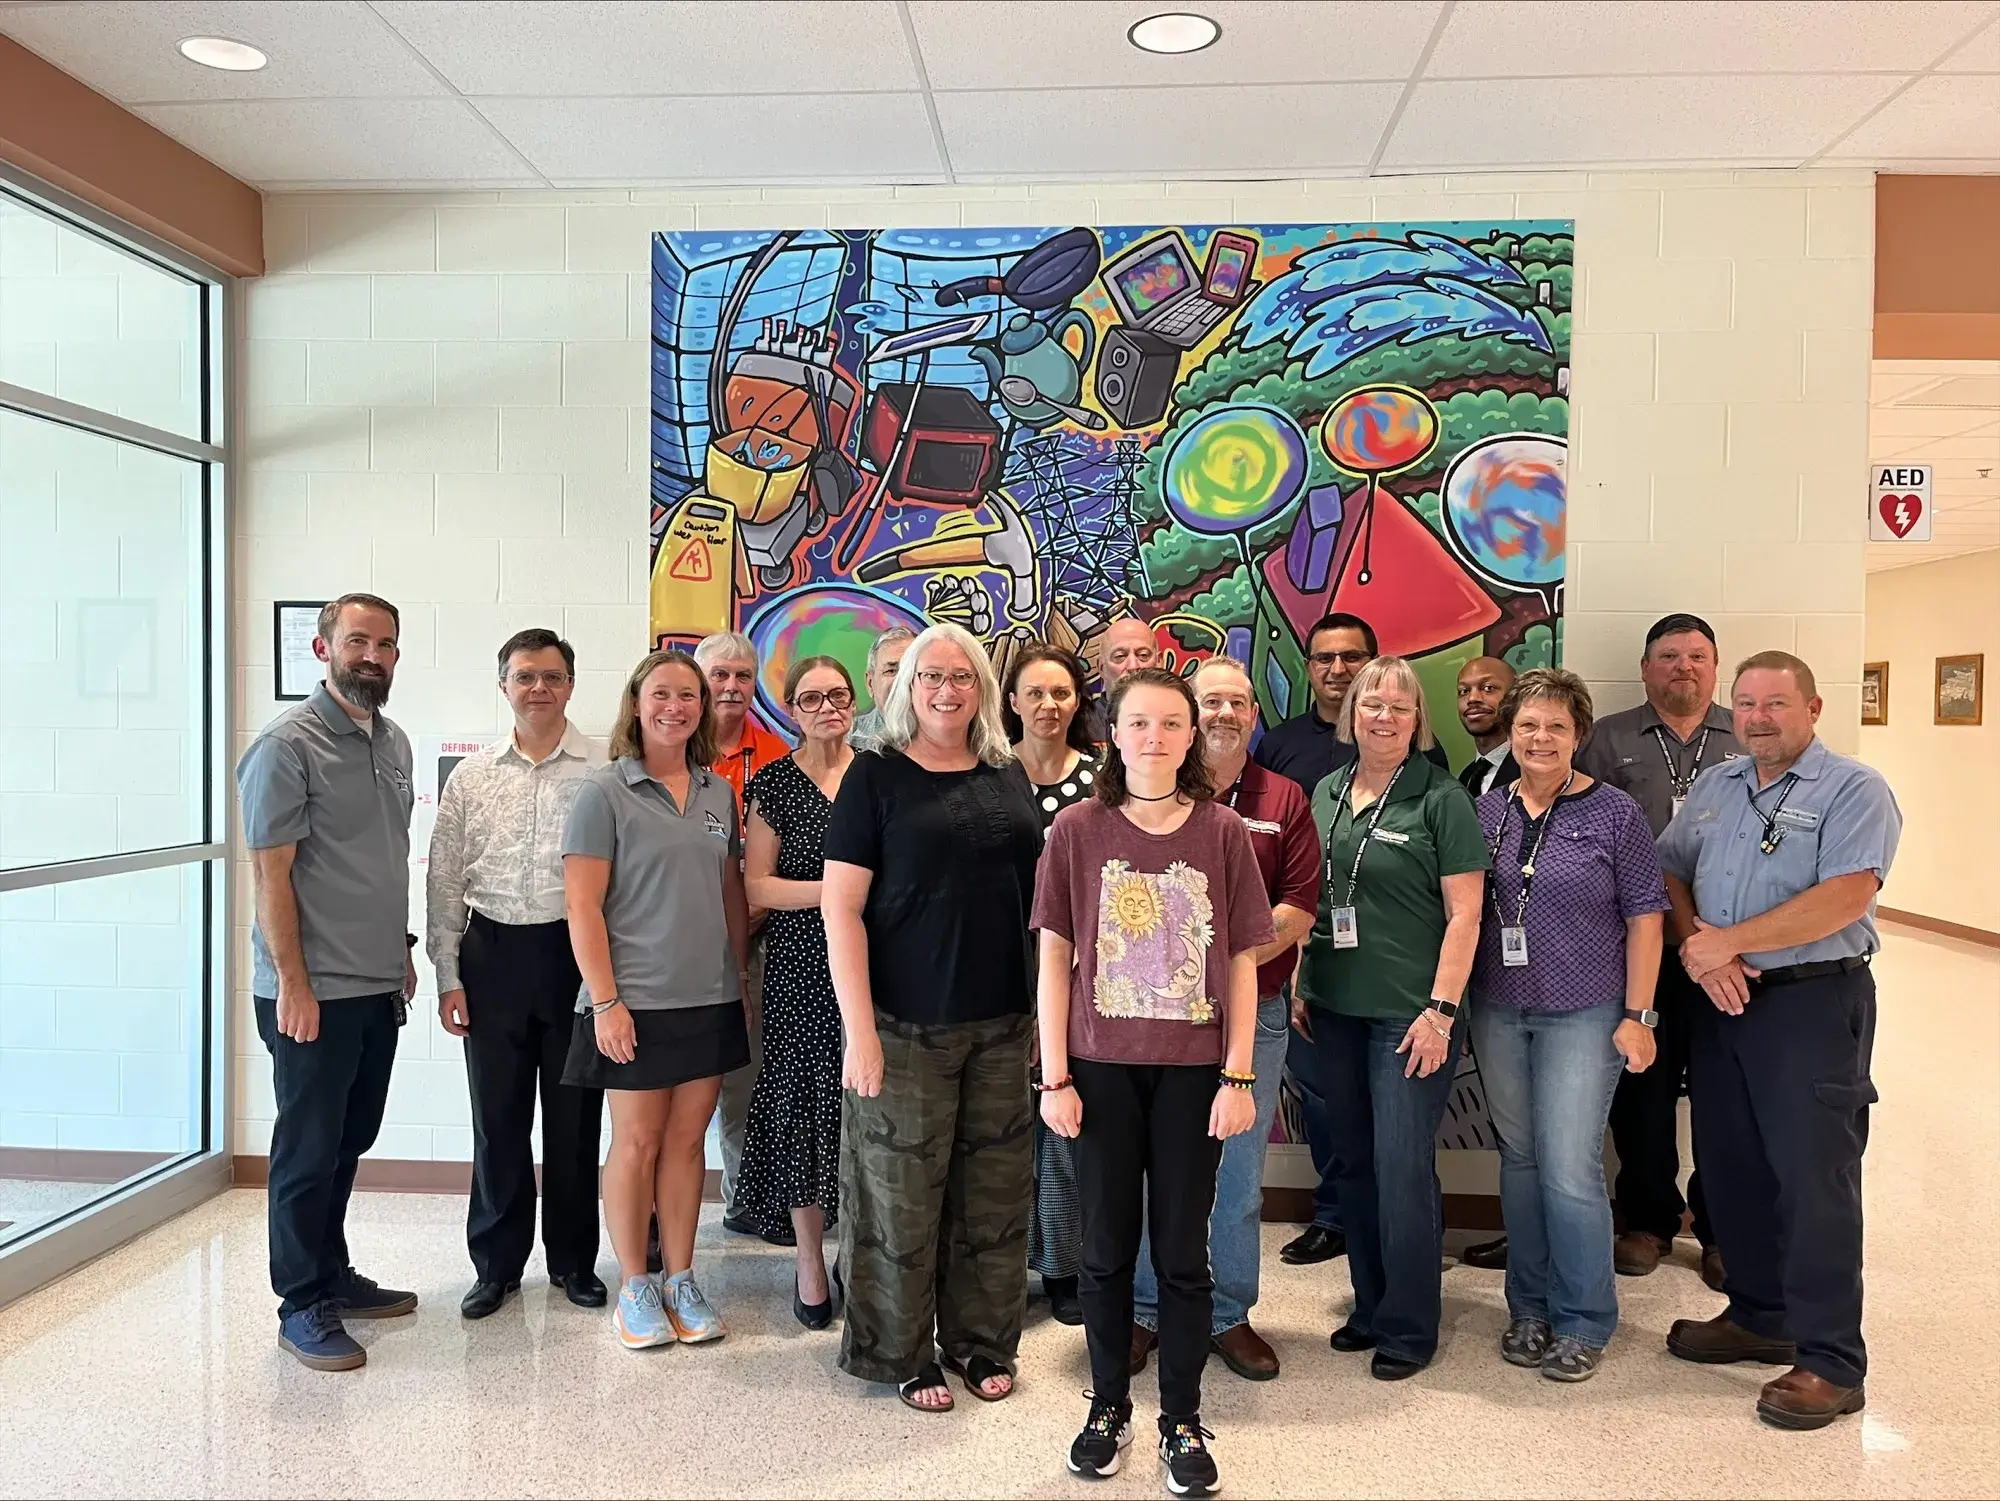 Facilities Department staff posing in front of the mural